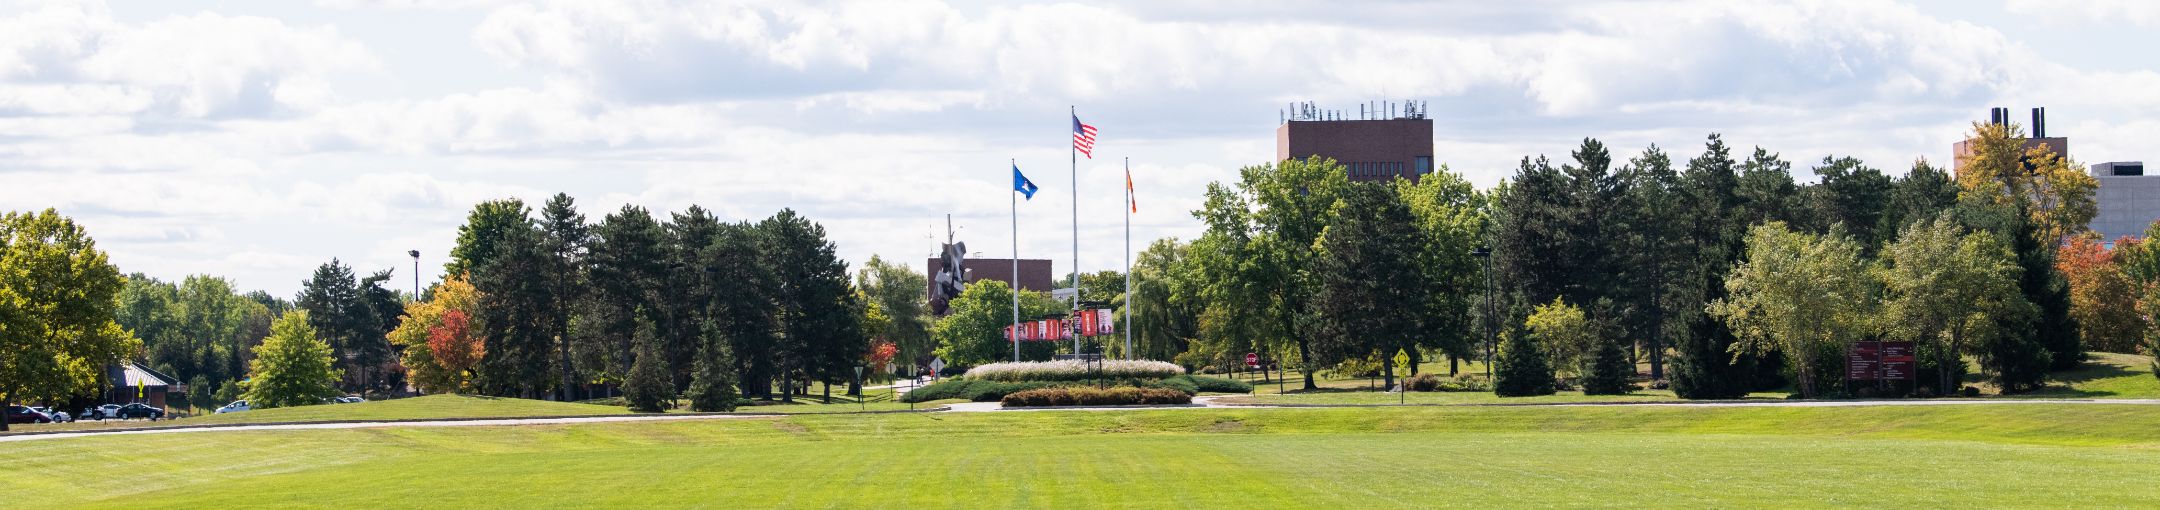 Grassy photo of RIT Campus, showing the flags on poles.